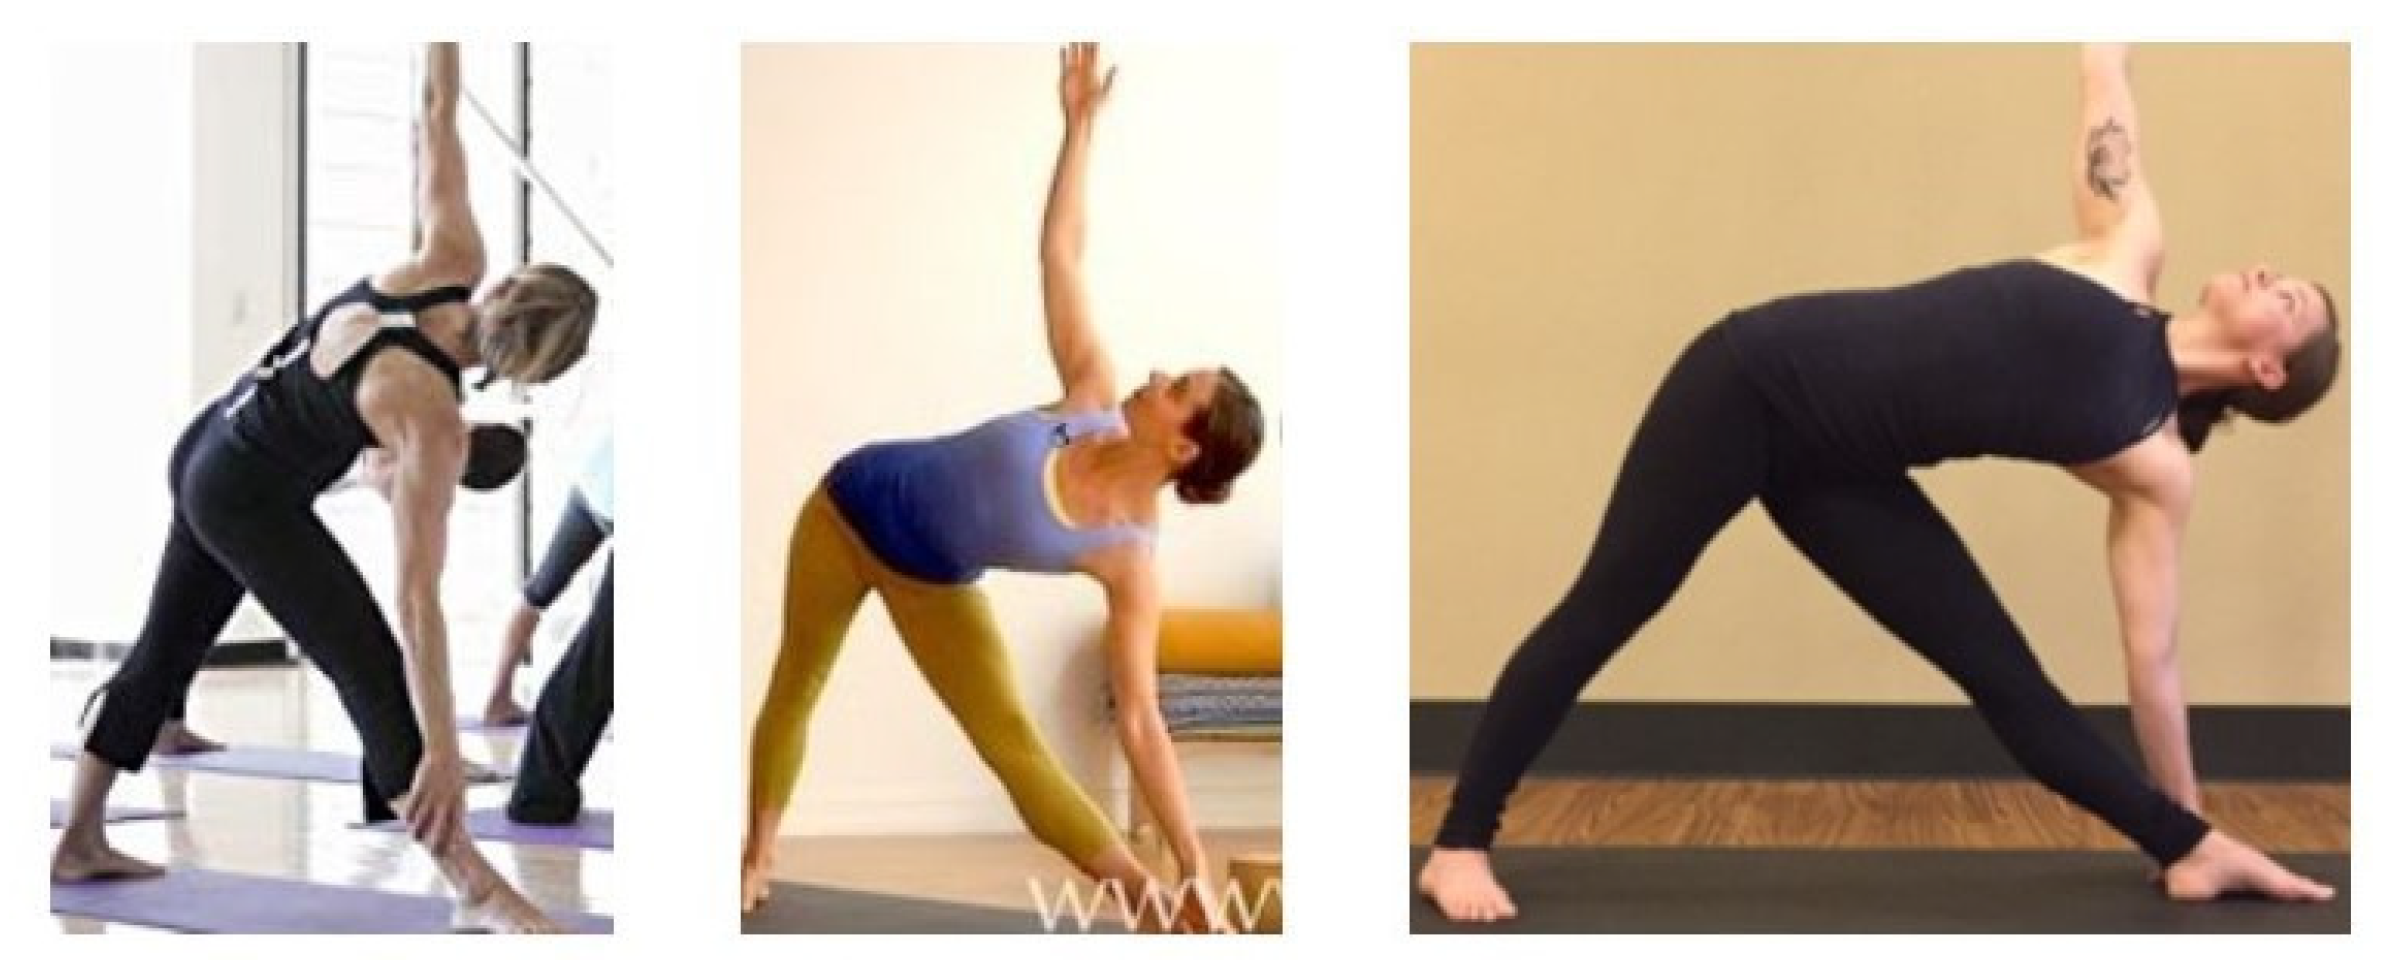 ZenFlow - Enlightened Yoga Pose Classification Via Transfer Learning M –  Projects by SmartInternz